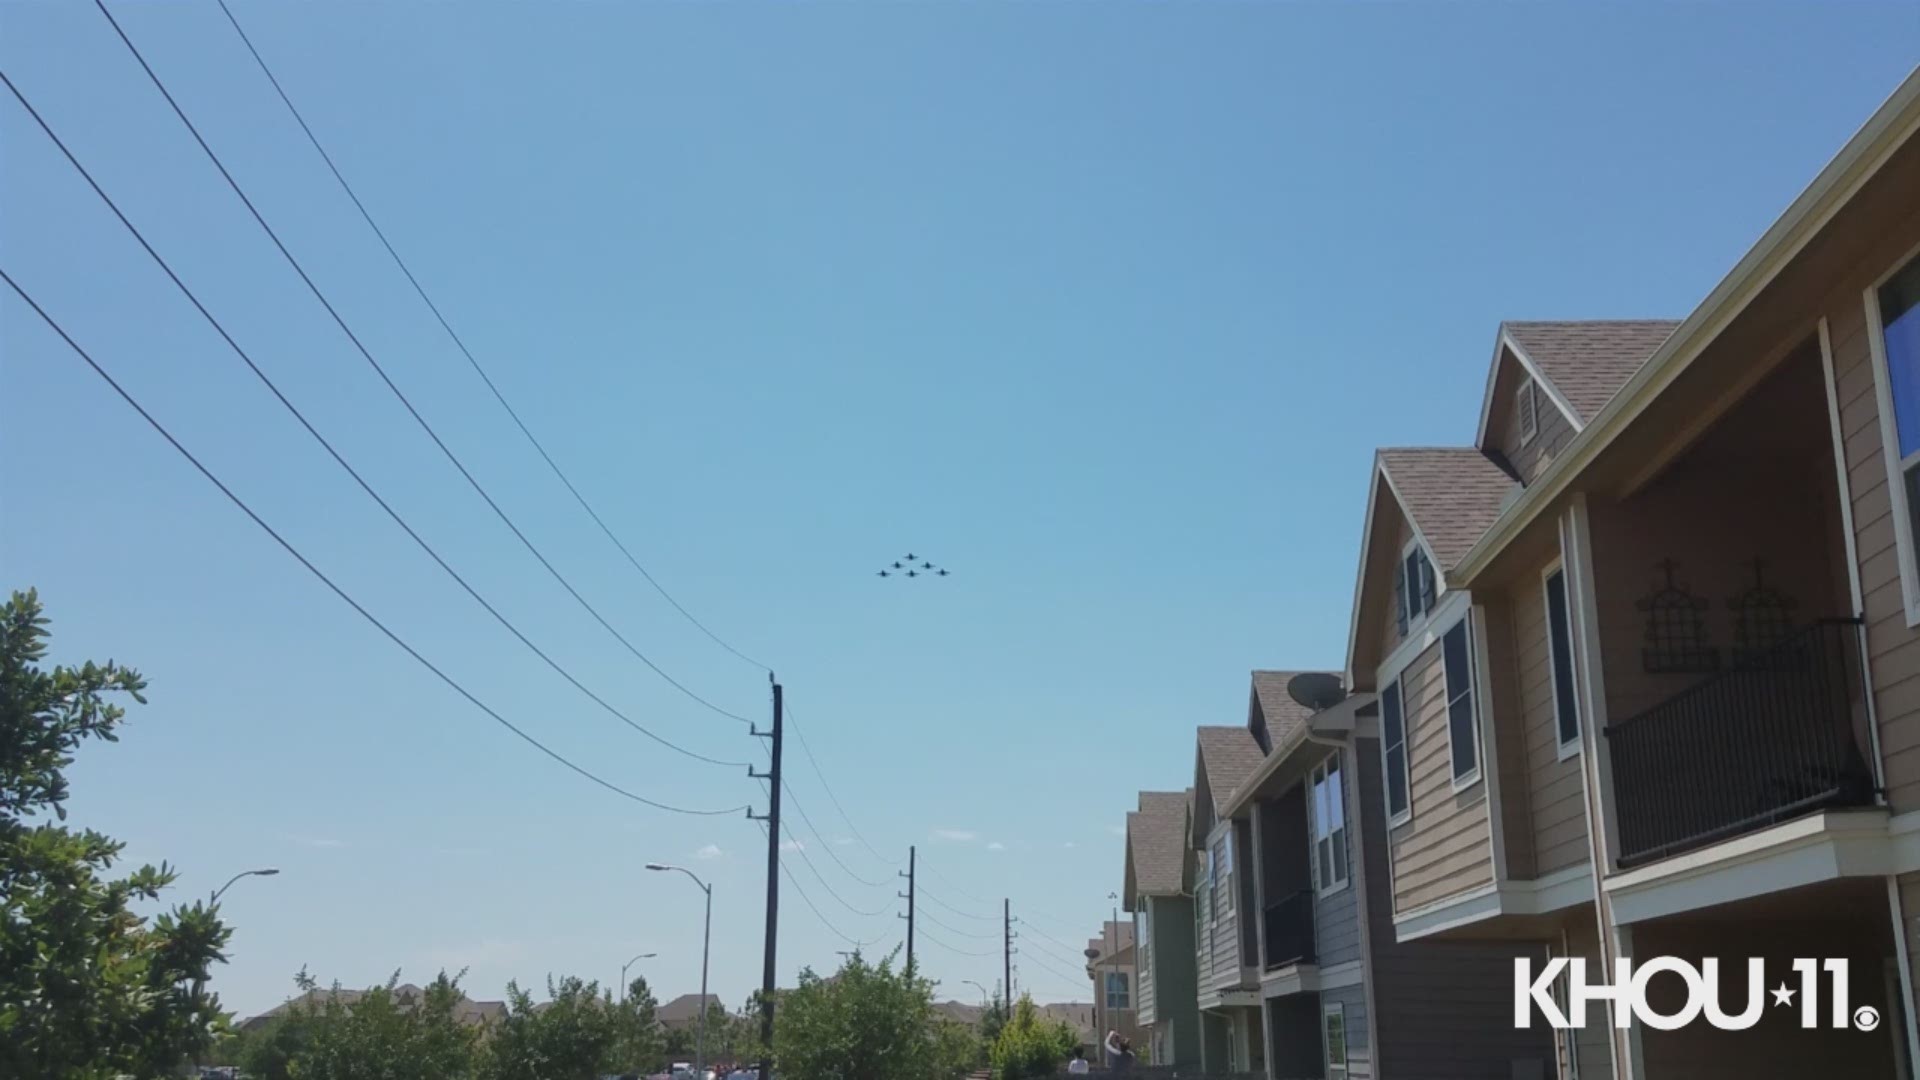 The U.S. Navy Blue Angels flew over the Houston area including Fort Bend in tribute to frontline workers on Wednesday.